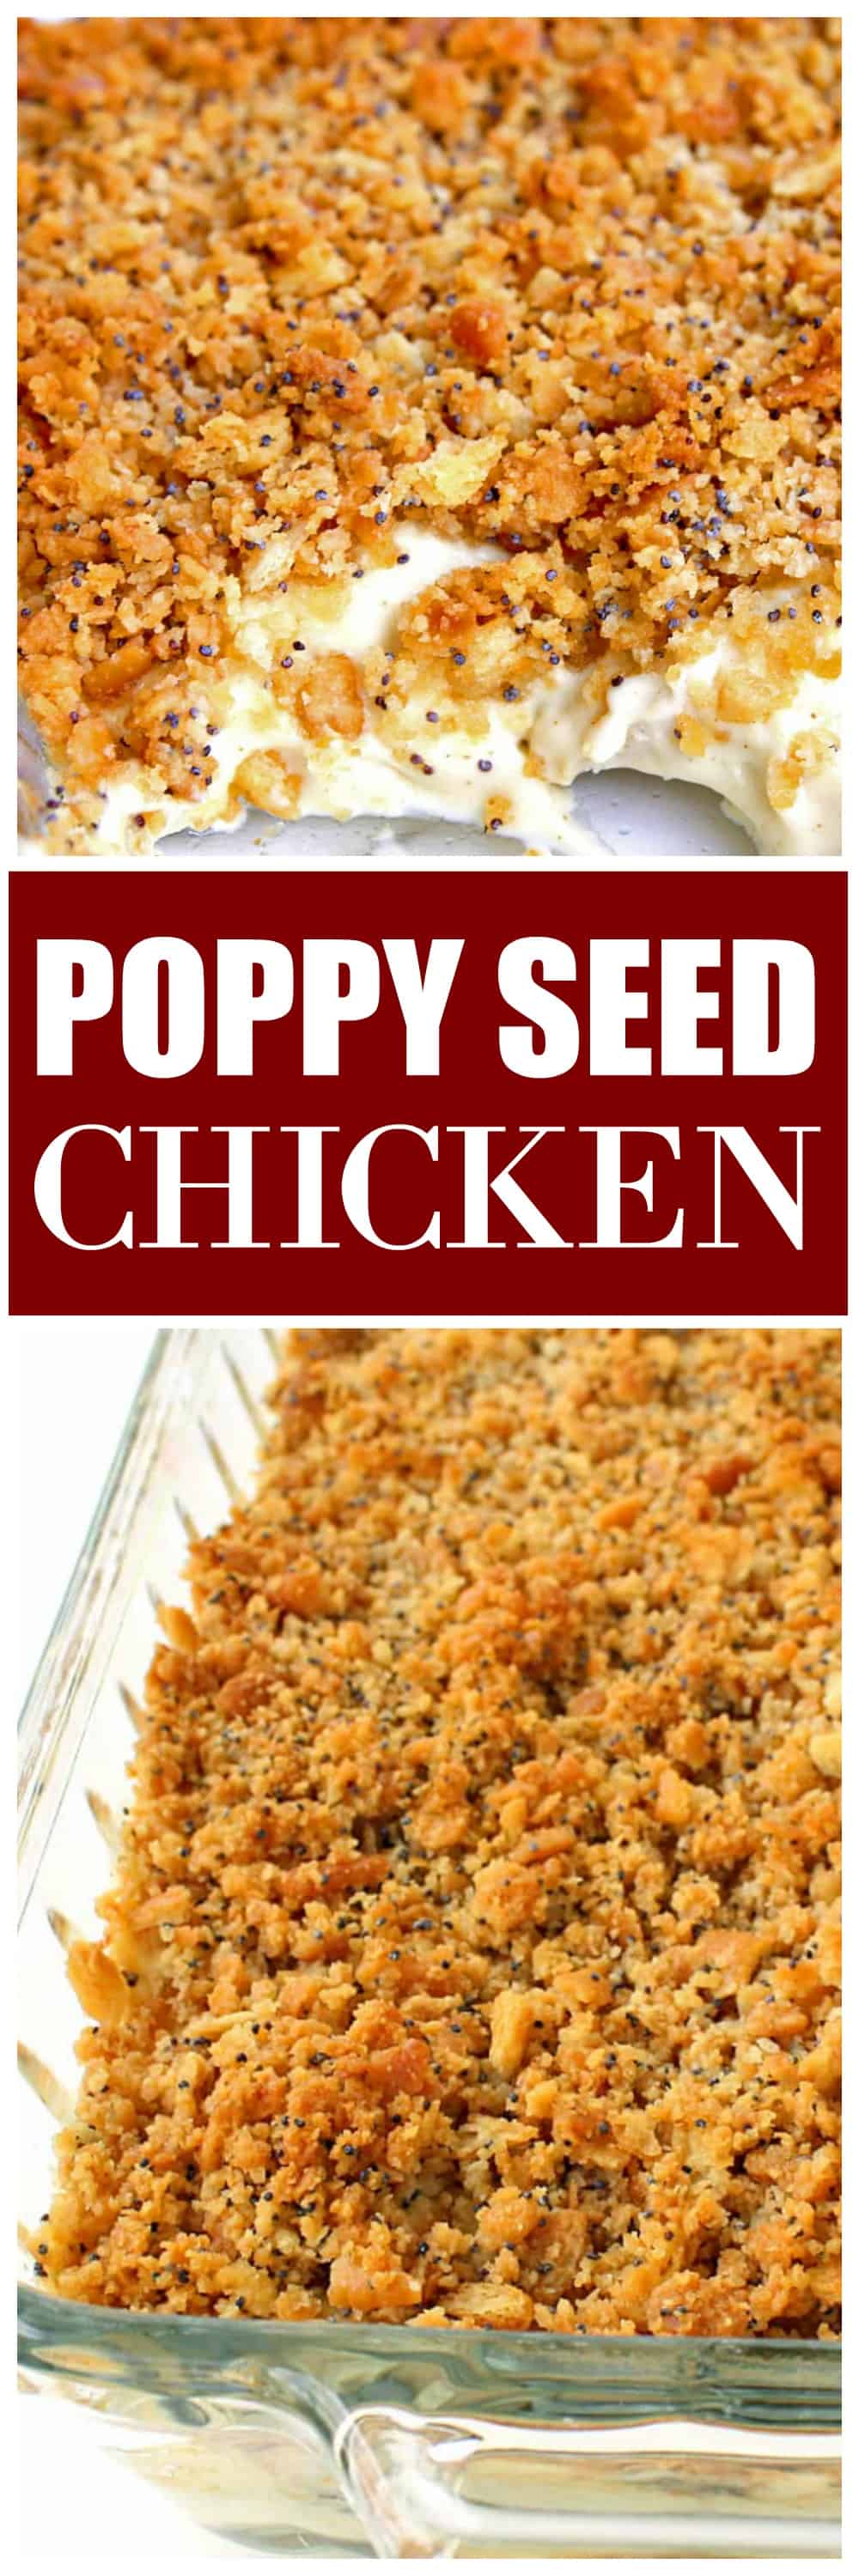 Poppy Seed Chicken - A creamy and easy dinner that your whole family will love. #poppy #seed #chicken #casserole #recipe